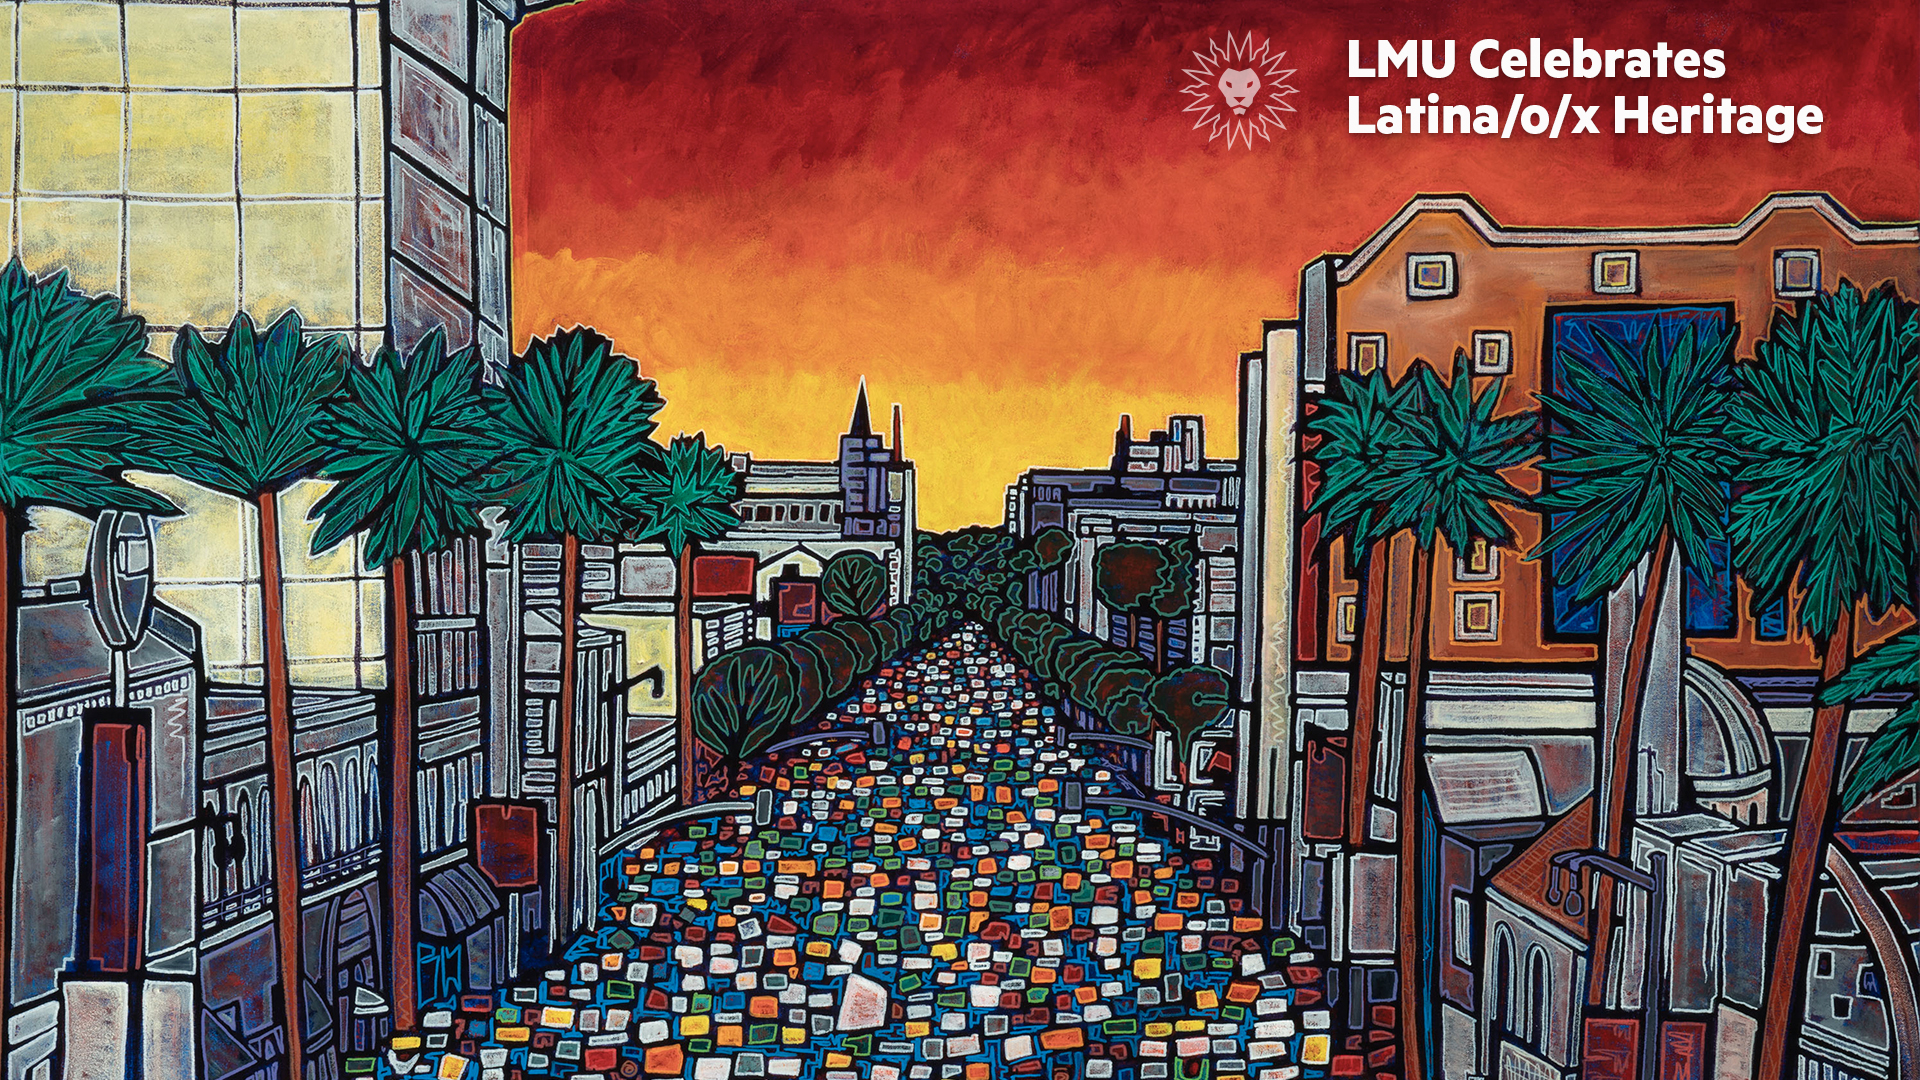 2021 LMU Zoom LHM 4 1 - Artist’s “Marcha” Adds to LMU Palette